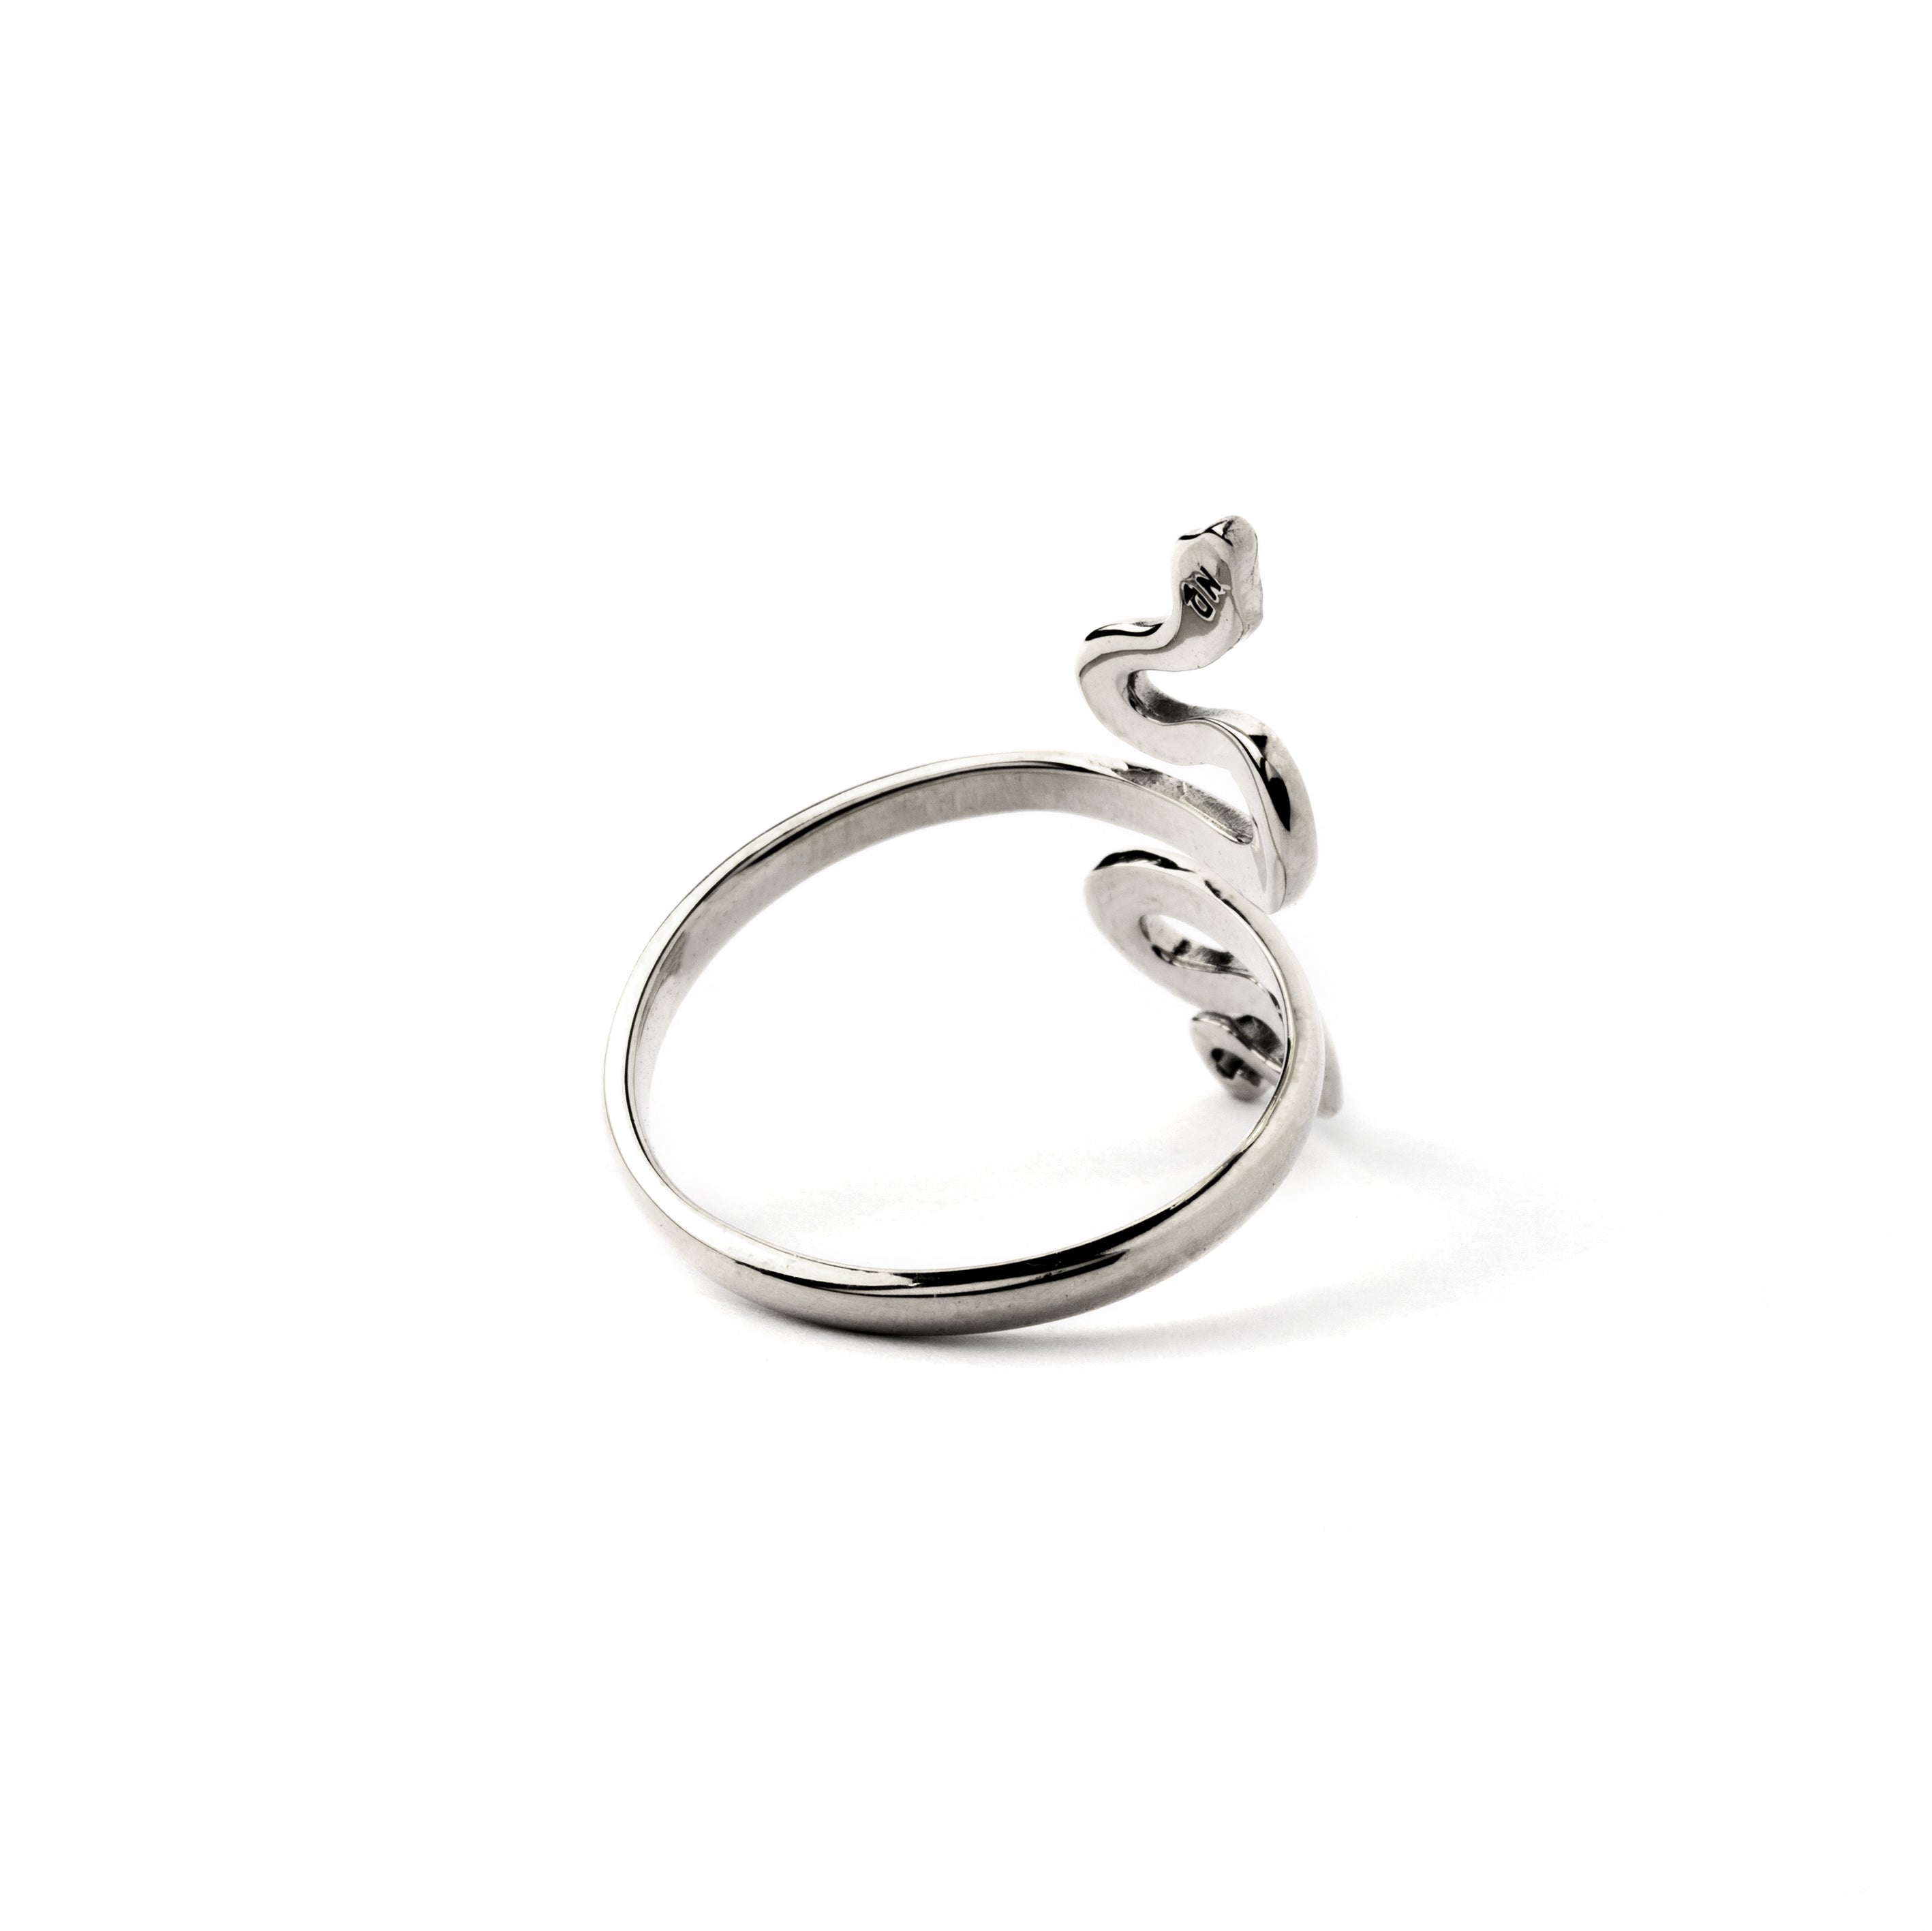 Silver Snake Ring back side view